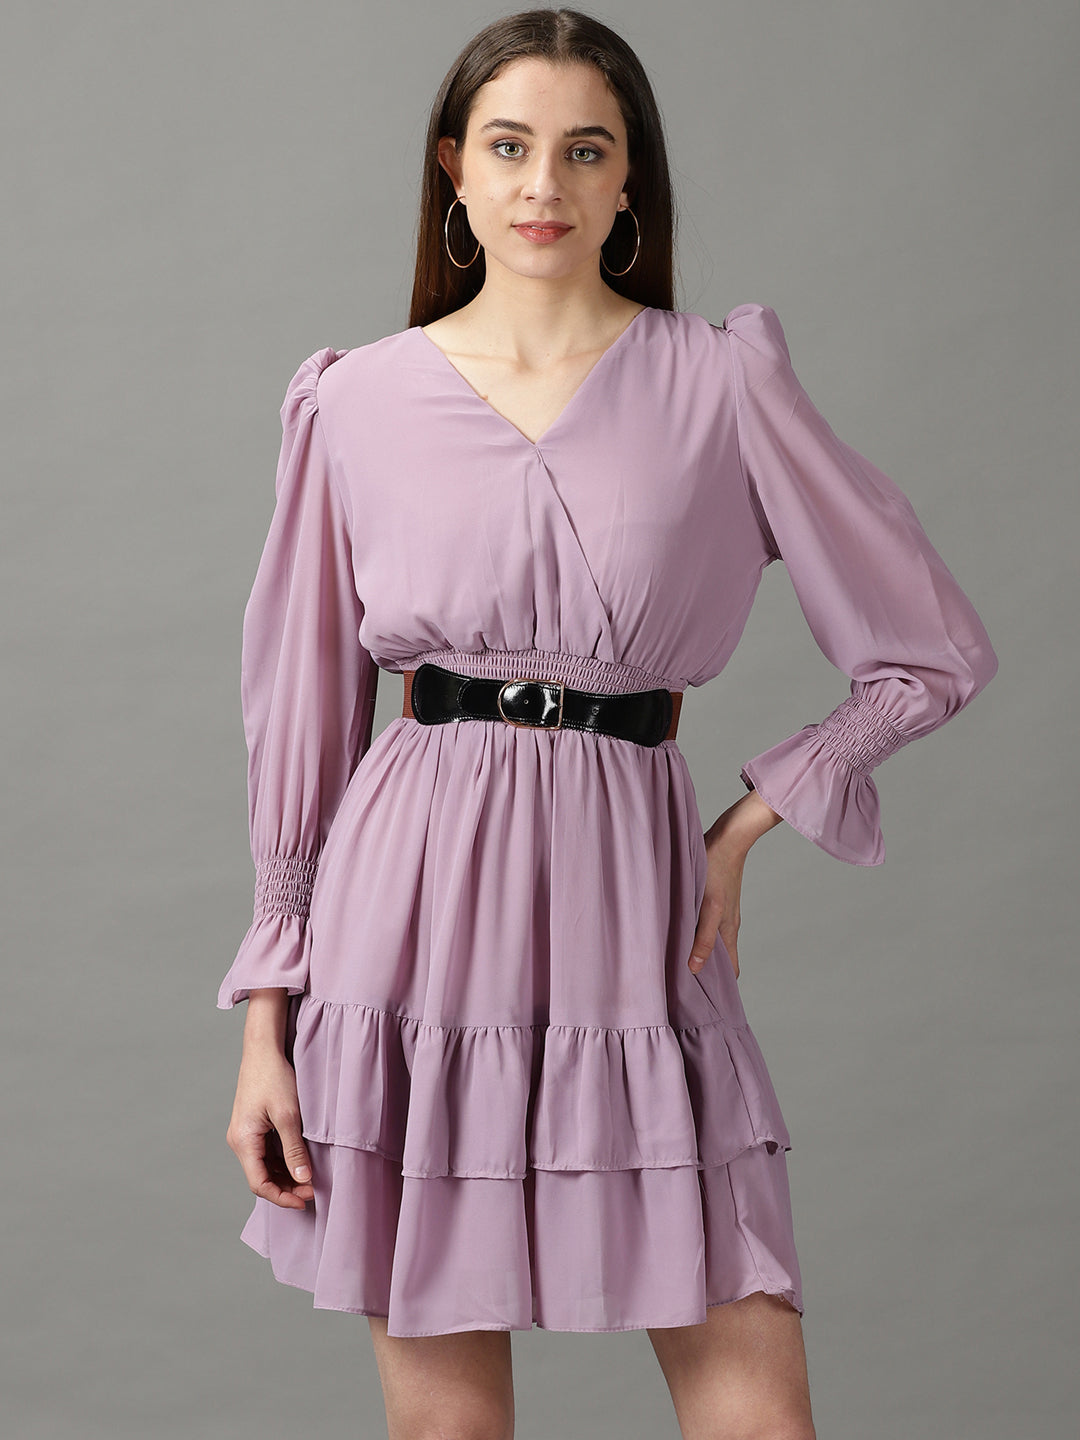 Women's Lavender Solid Fit and Flare Dress